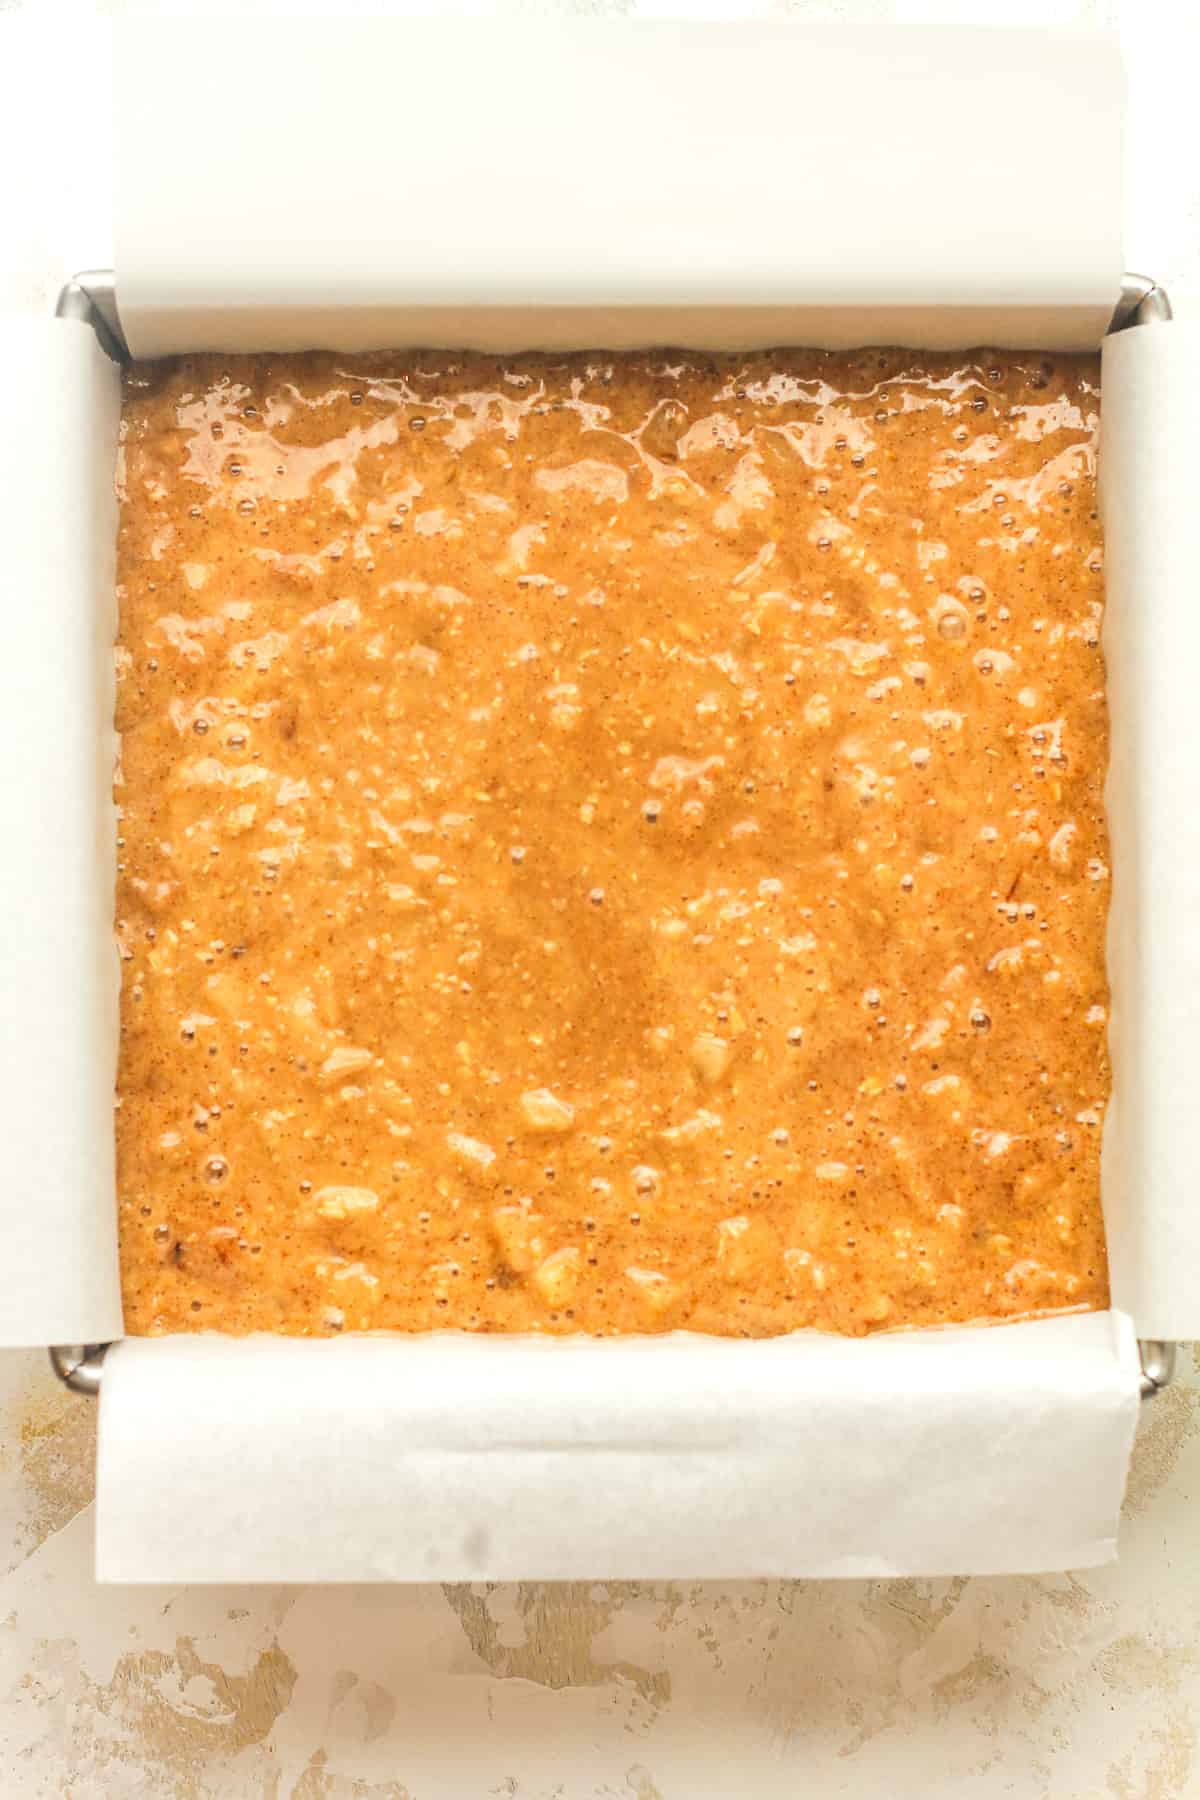 A square pan of the wet mixture.